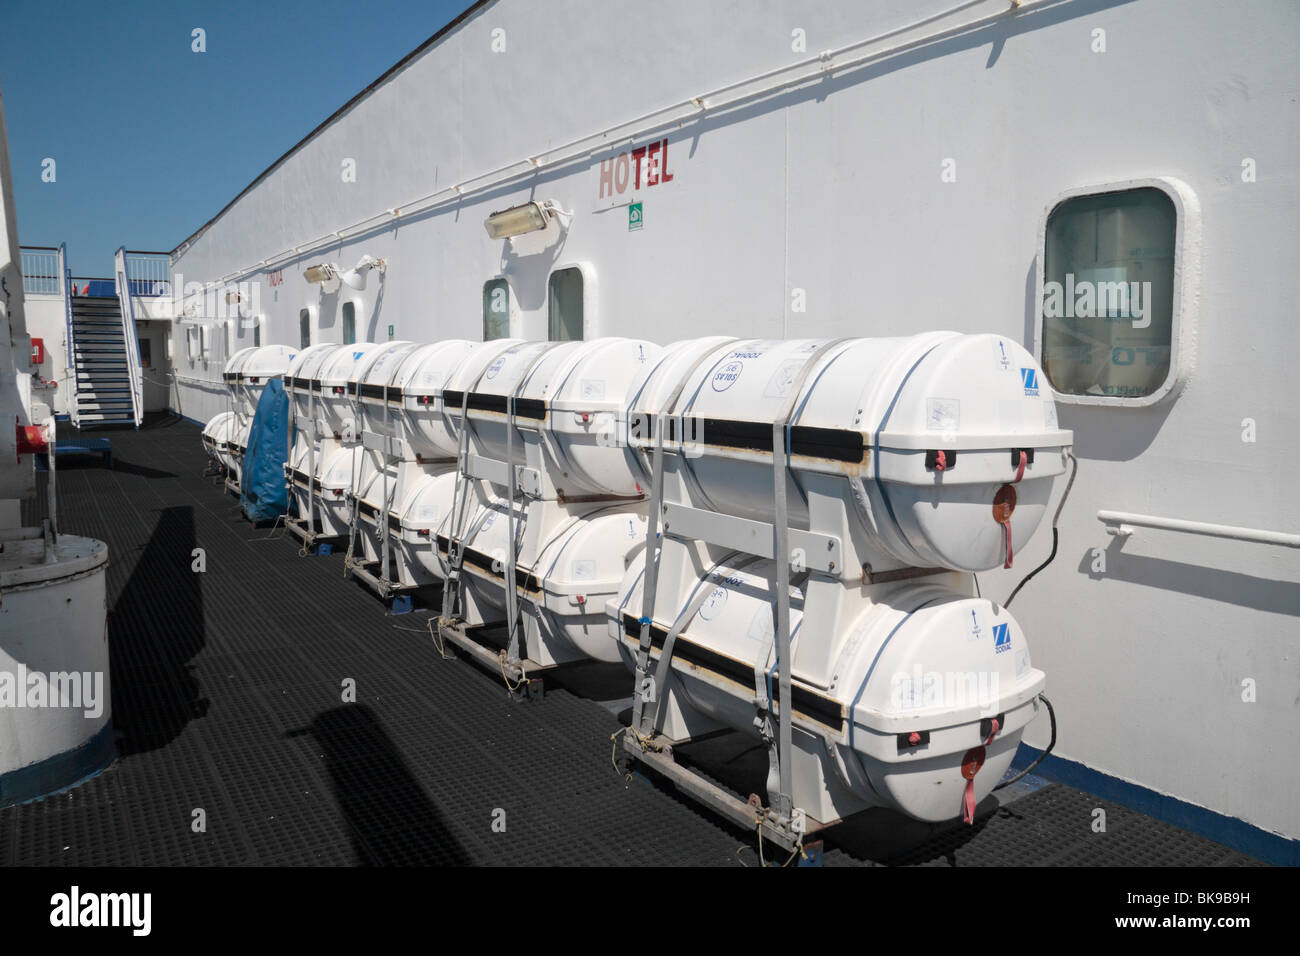 A line of inflatable life rafts on the deck of the Stena Europe car ferry, on the Irish Sea. Stock Photo